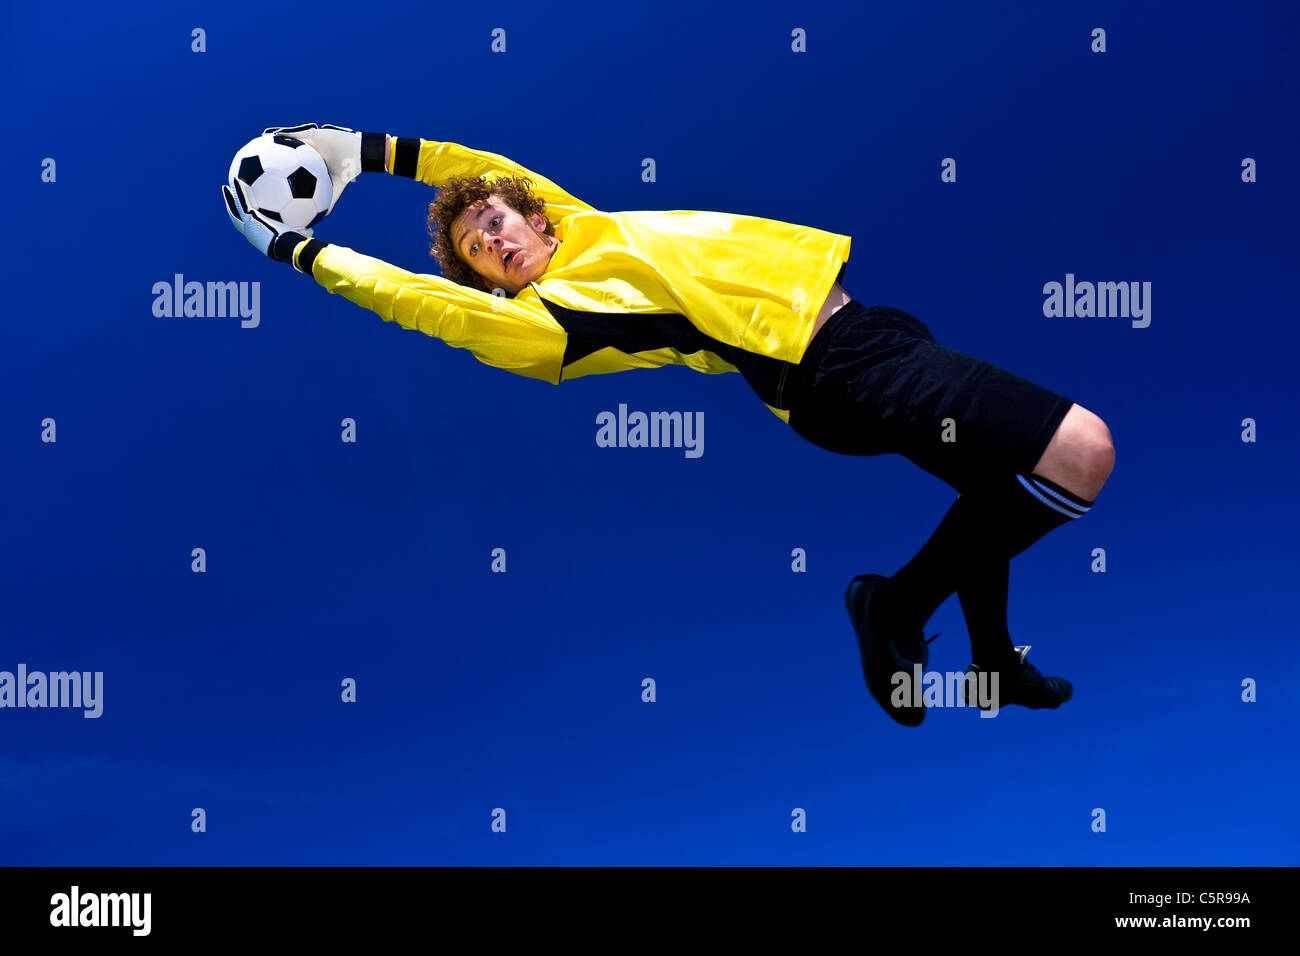 A goalkeeper stretches to make the save. Stock Photo